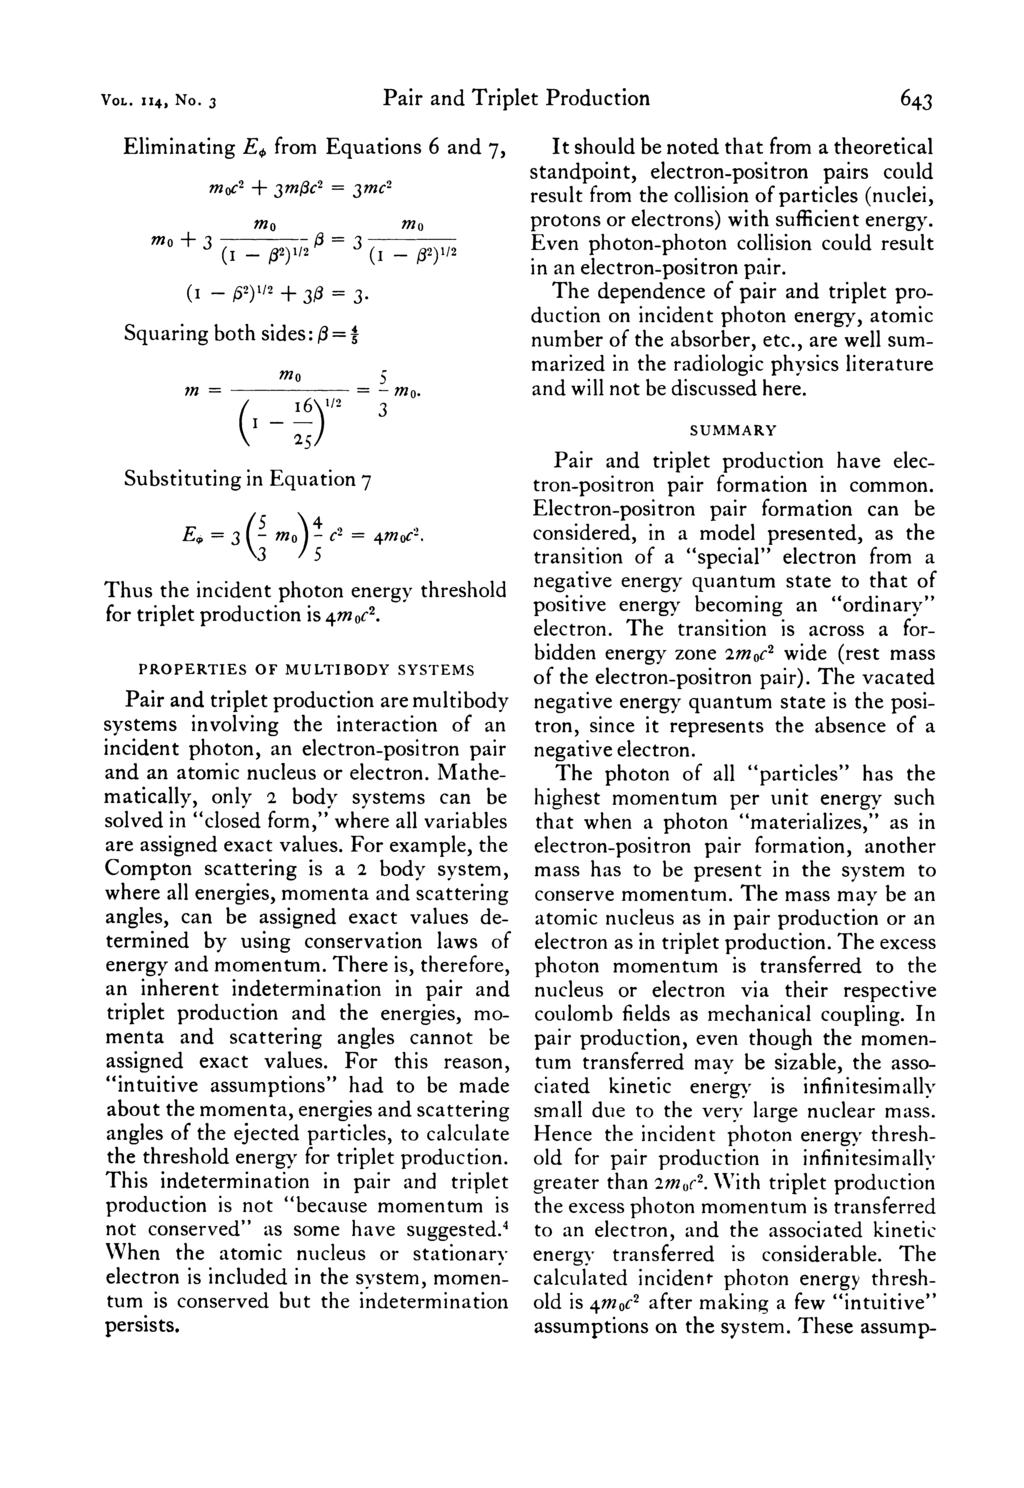 VOL. 114, No. 3 Pair and Triplet Production 643 Eliminating E,, from Equations 6 and 7, mo+3 m,c2 + 3mI3C2 = 3mc2 m m ( I - /32)5/2 (I - p2)1/2 (I - 52)1/2 + 313 = 3.